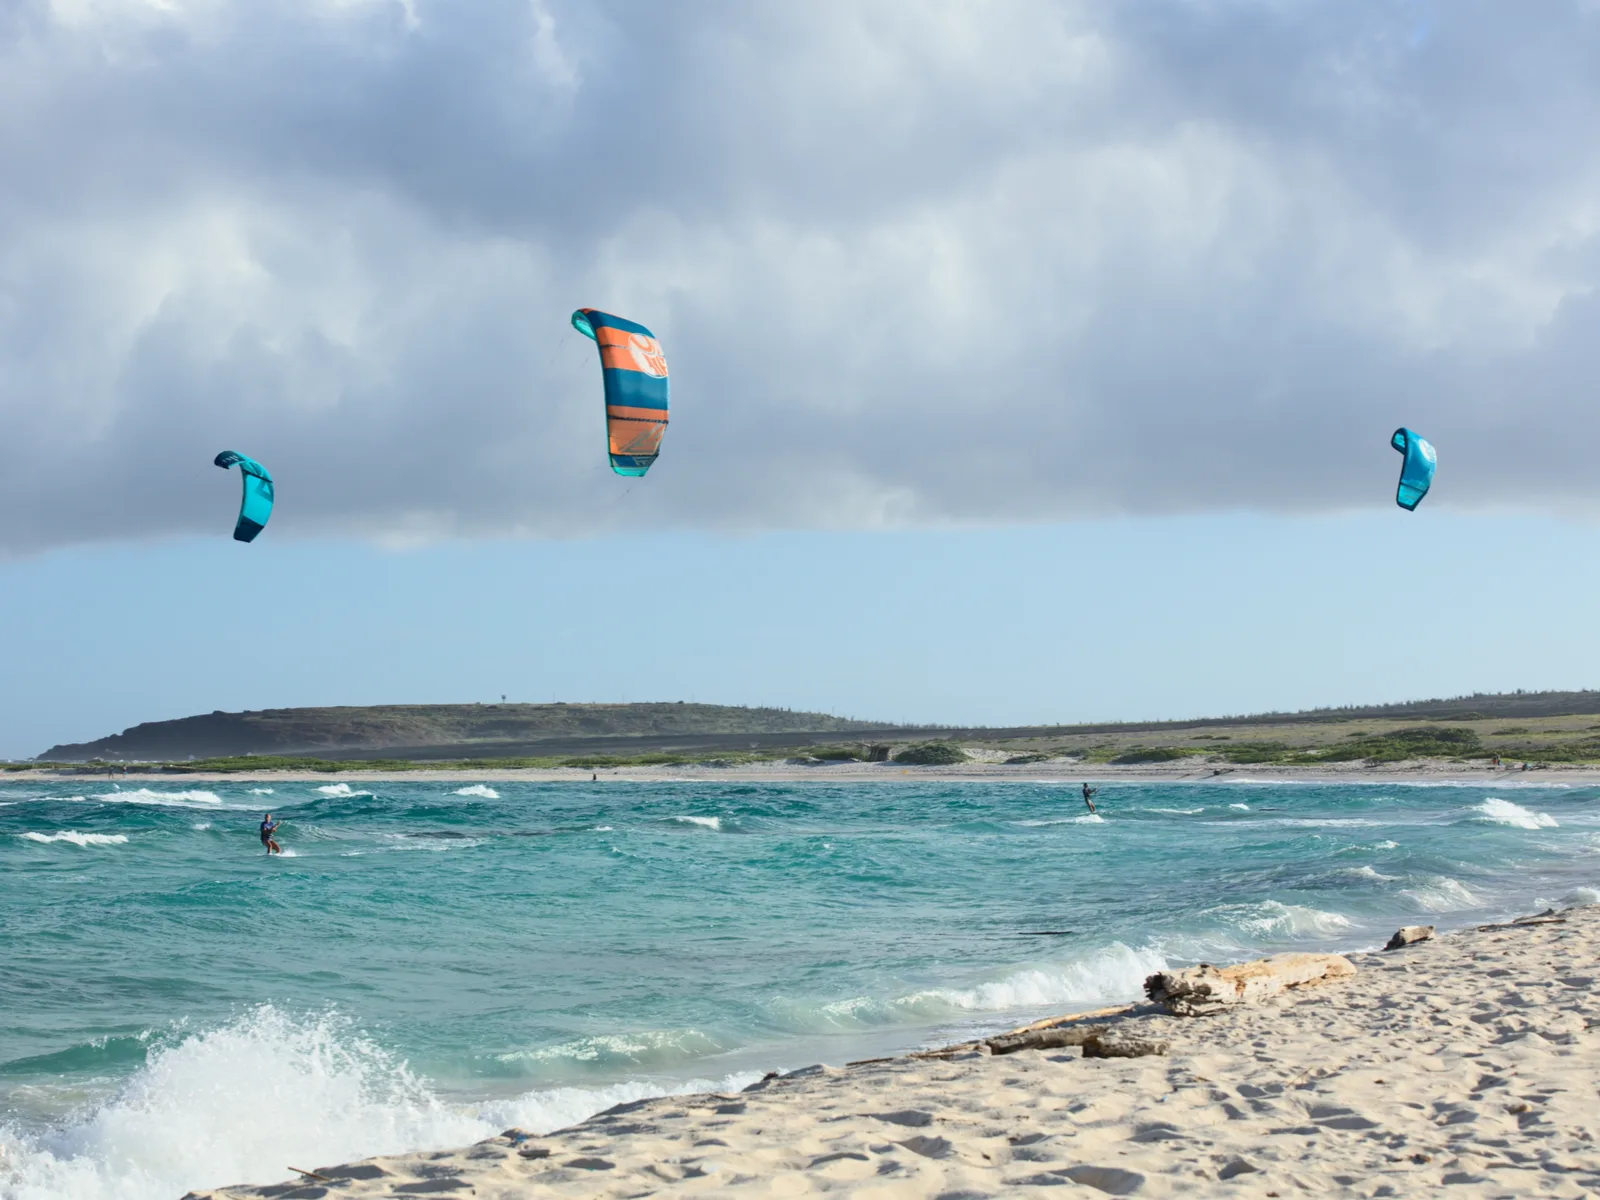 One of the best beaches in Aruba, Boca Grandi with tourists Kitesurfing on strong waves during a cloudy and windy day